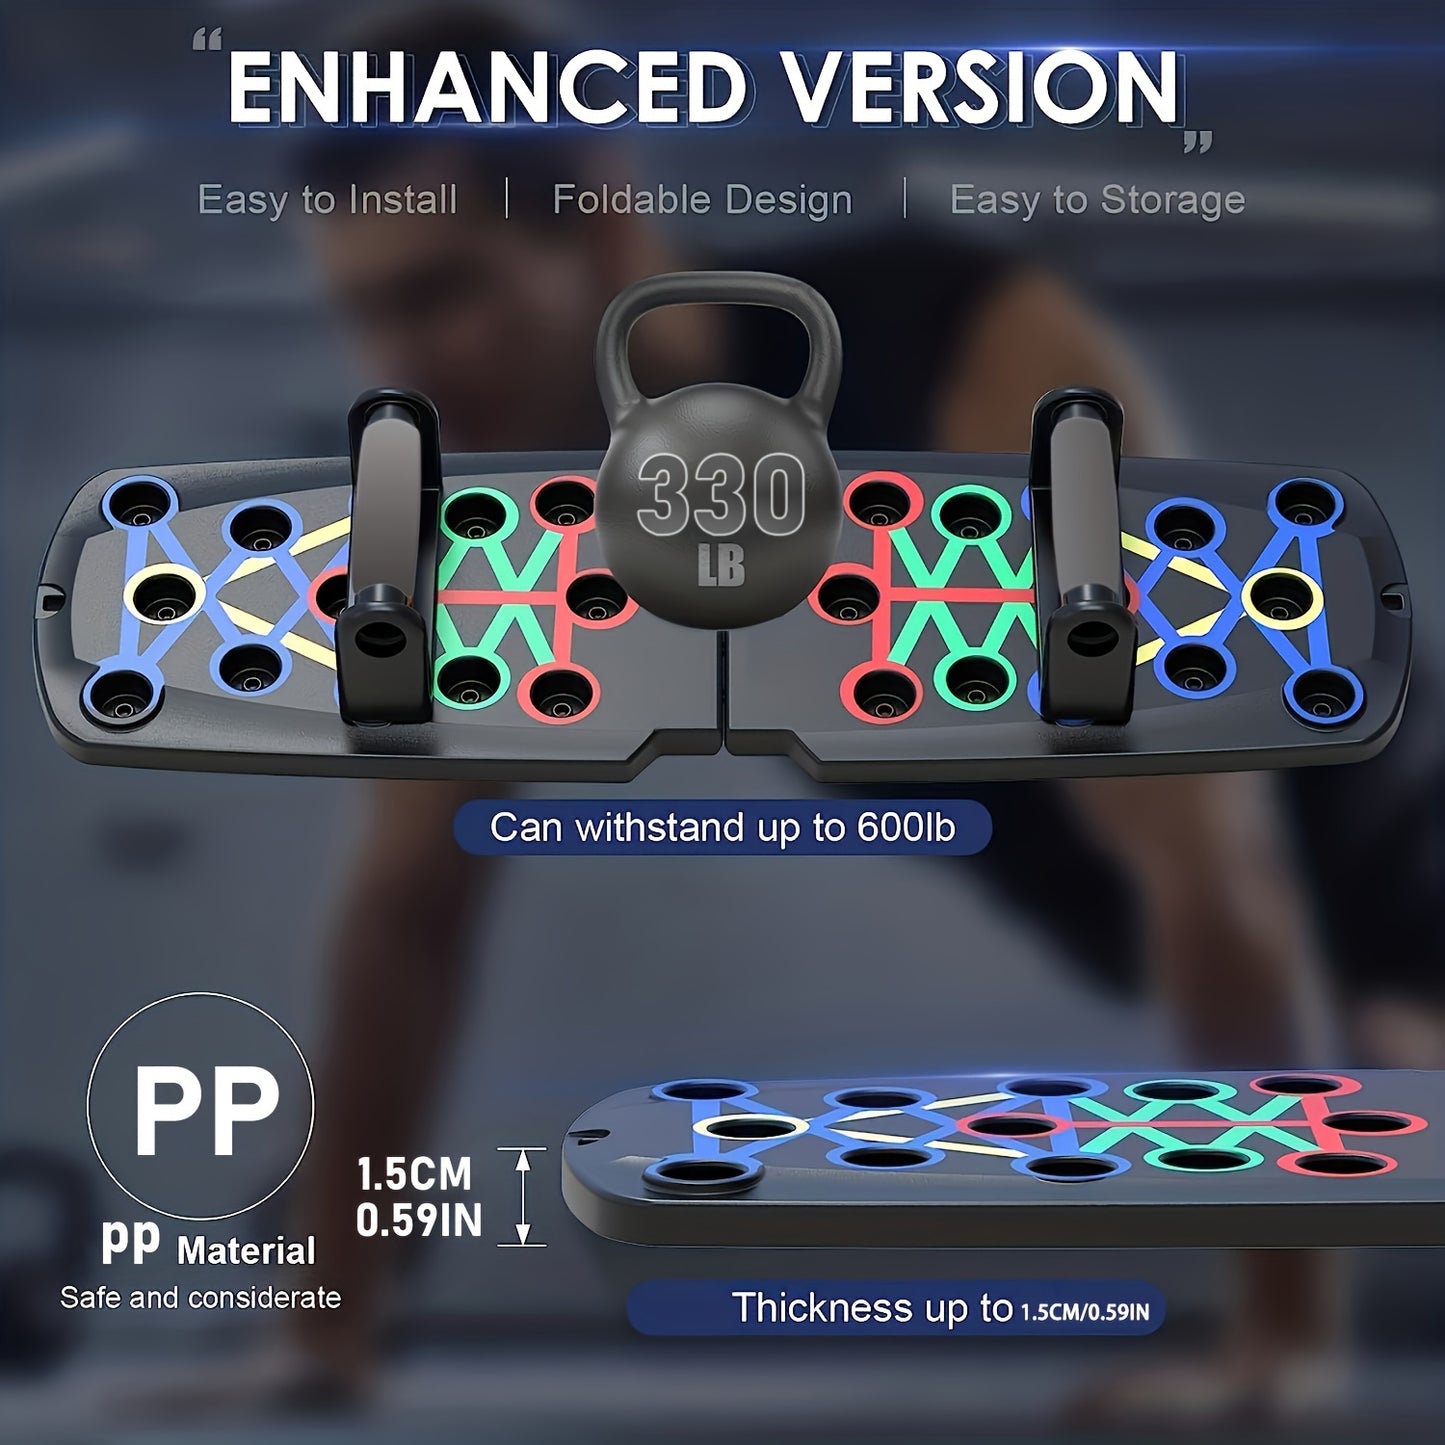 1pc Multifunctional Folding Push-up Board For Home And Gym Workouts - Build Strong Chest Muscles And Improve Overall Fitness